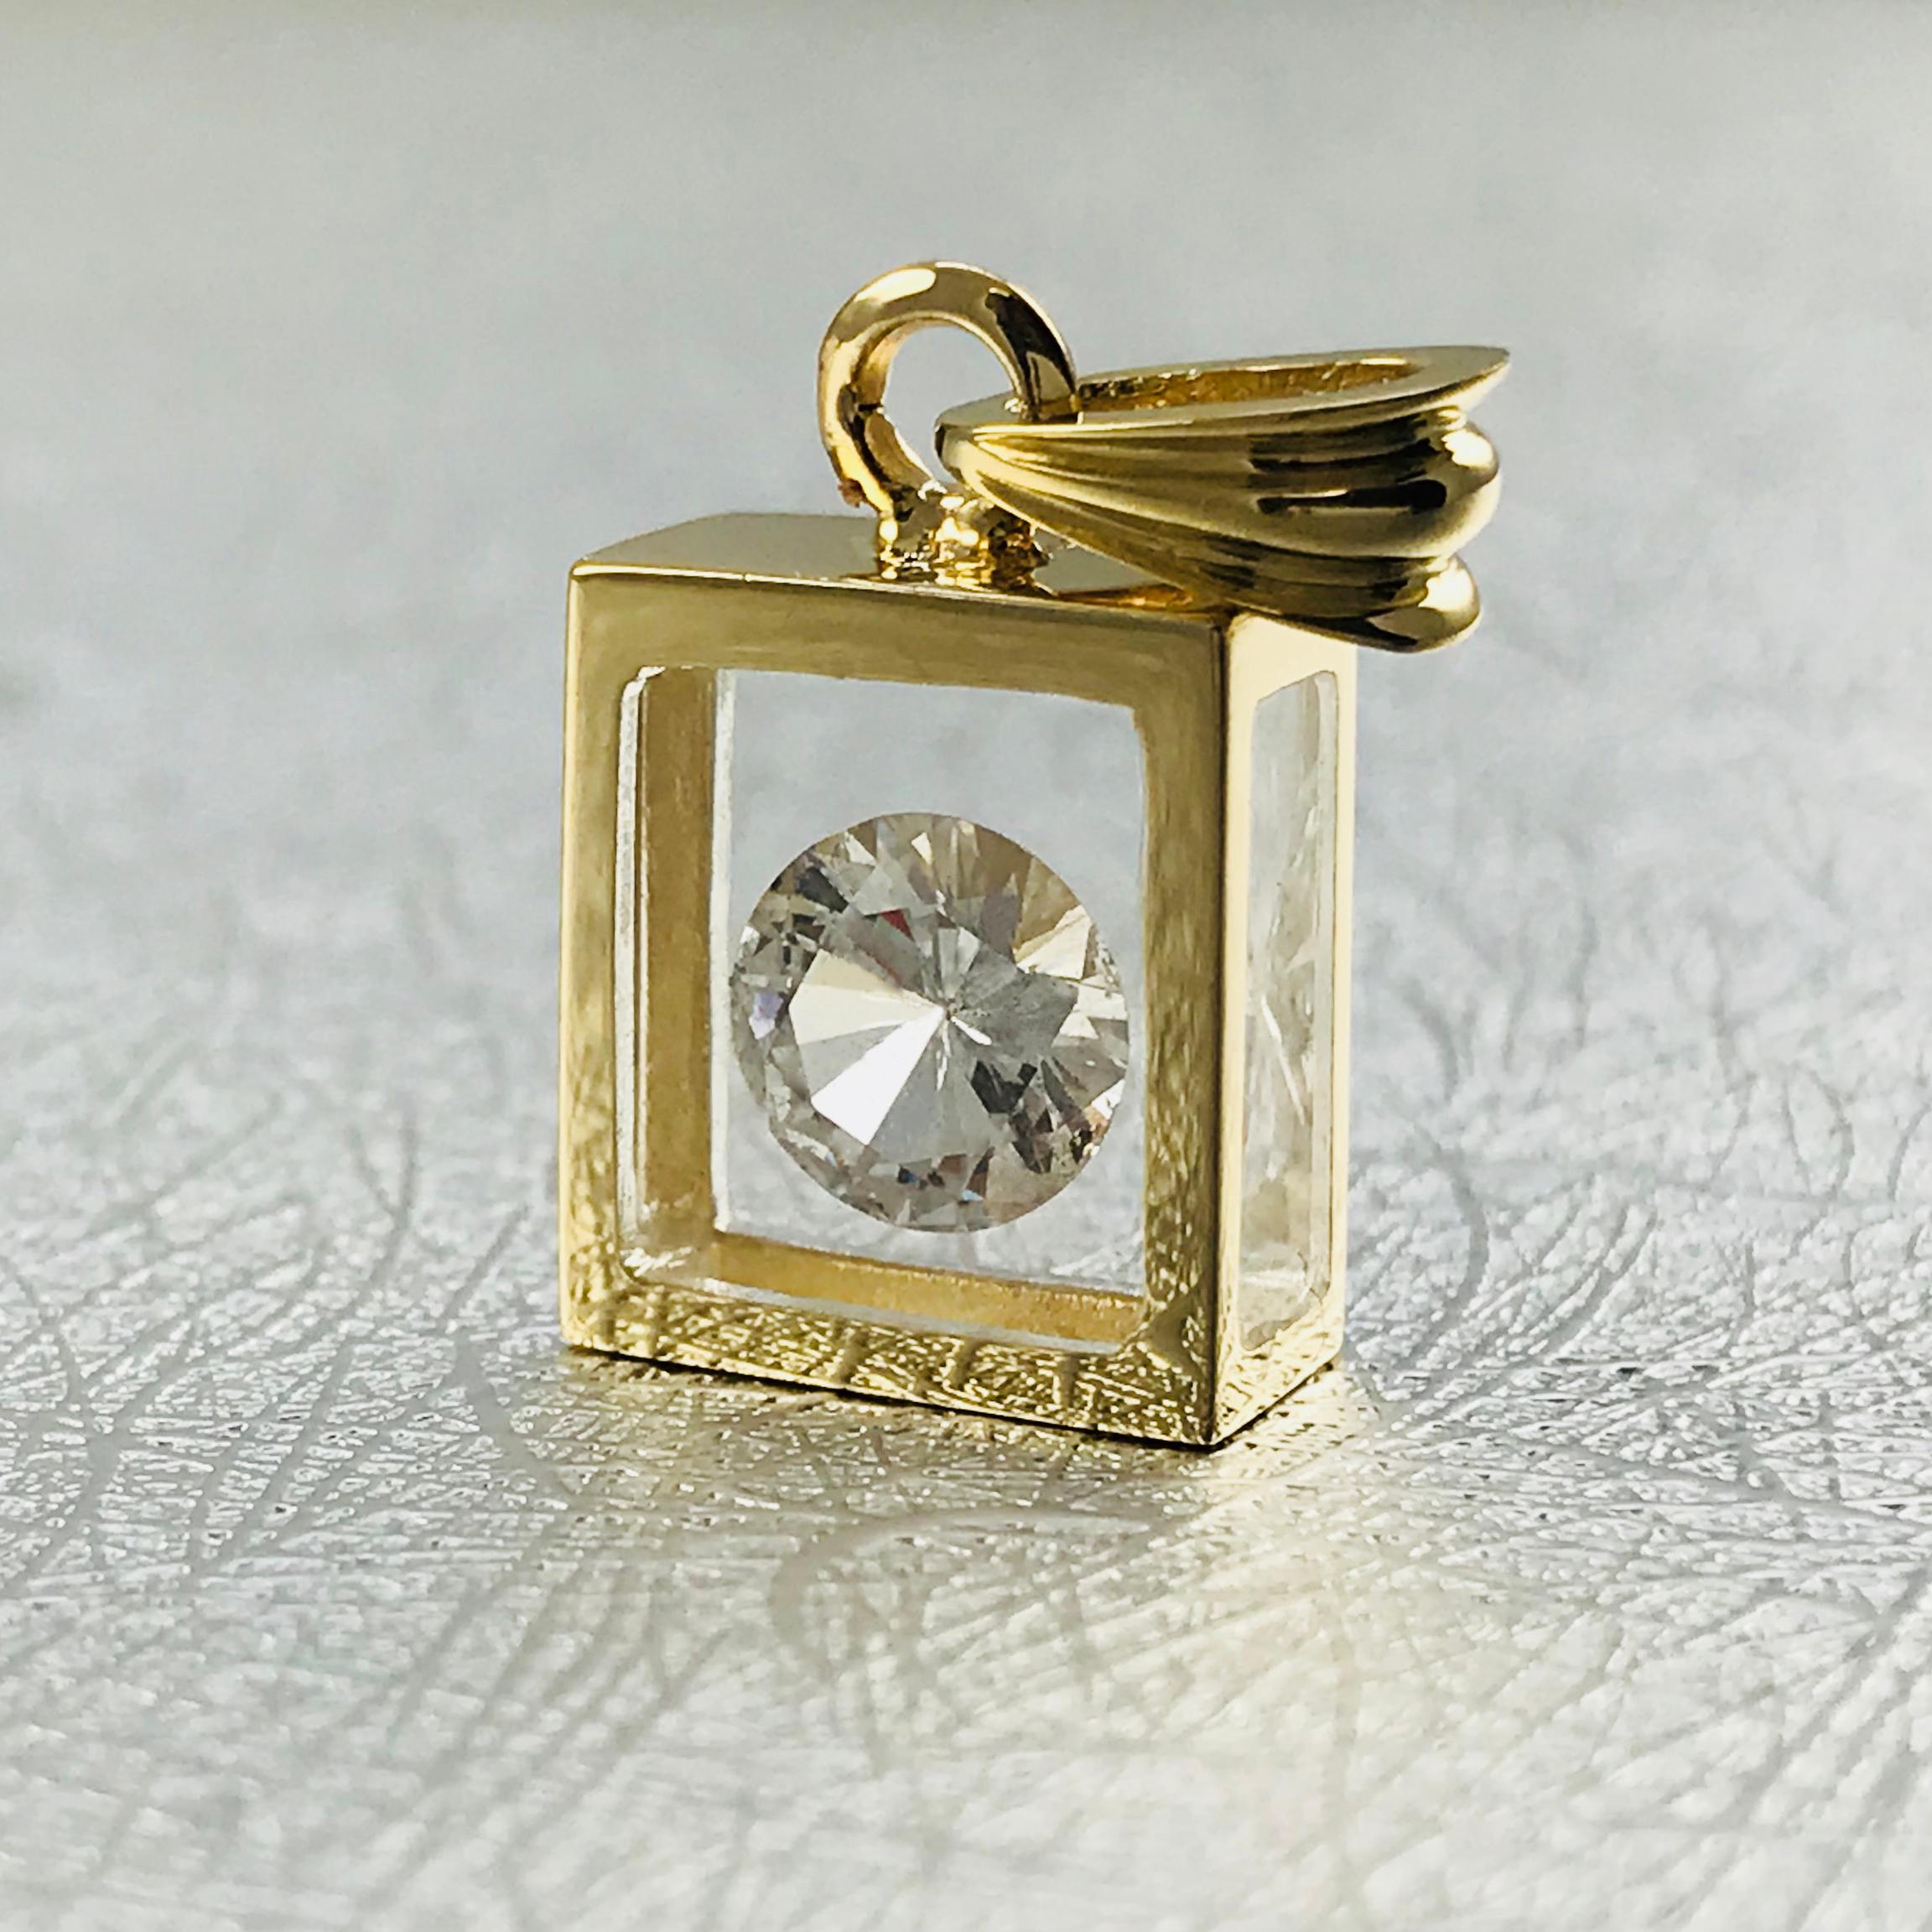 Incogem Floating 1.15 Carat Solitaire Diamond Pendant: 14k Yellow Gold. The pendant is handcrafted of recycled 14k yellow gold. The 1.15 carat diamond is brilliant cut, 58 facets, I1 in clarity (G.I.A.) and G in color (G.I.A.). The pendant measures